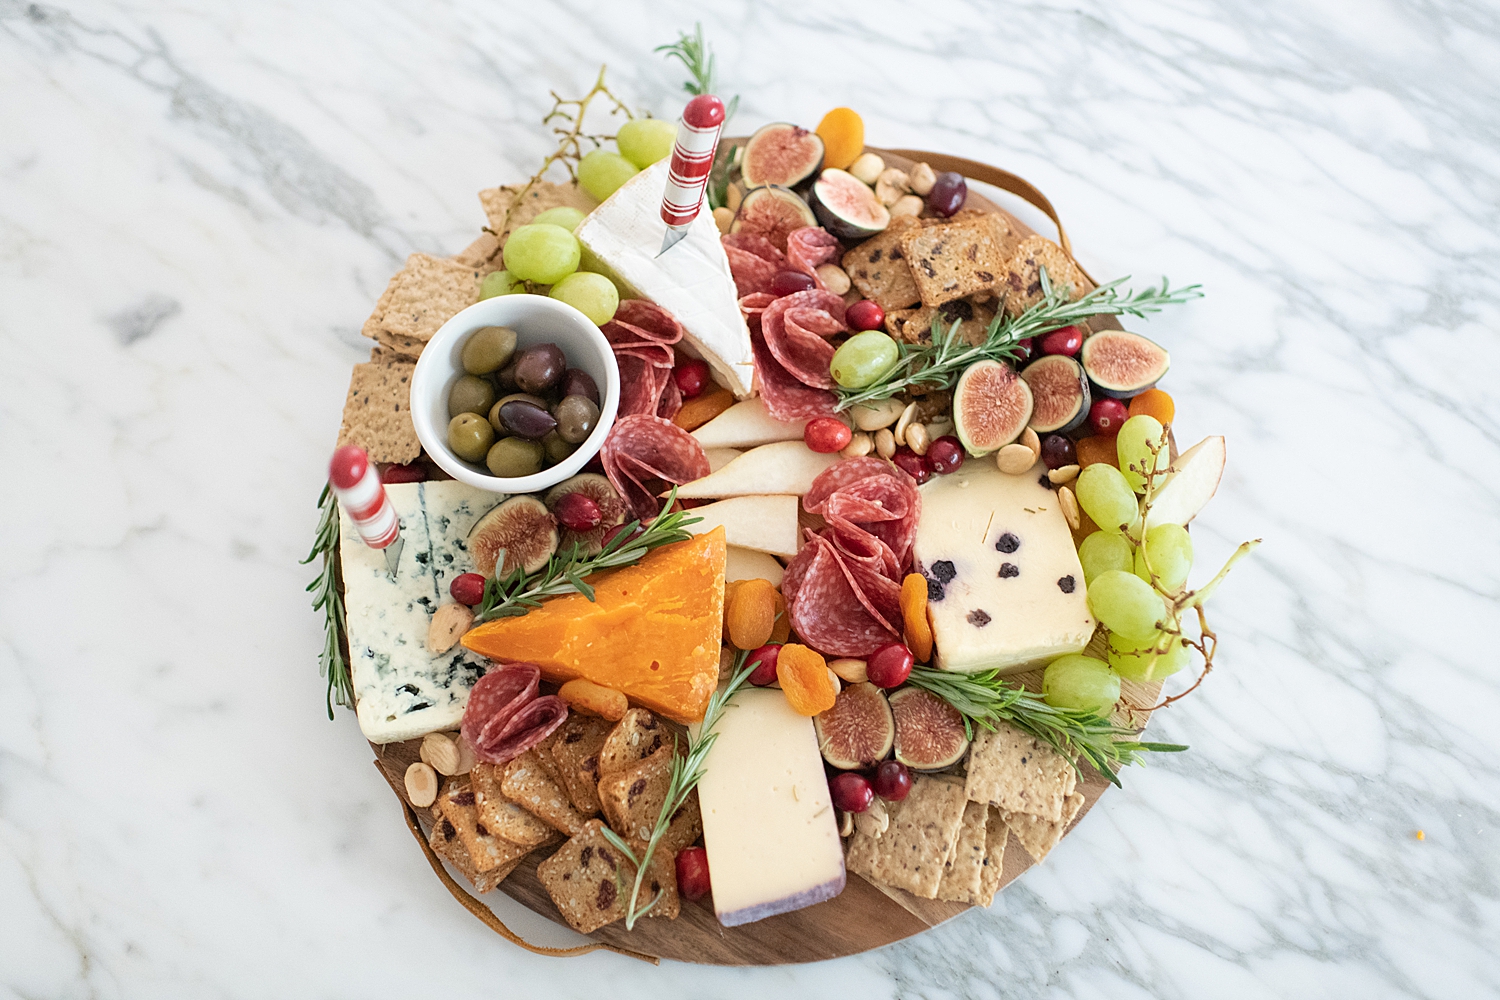 Top Houston life and style blogger, Fancy Ashley, features her tips to prepare the perfect Charcuterie Tray for the Holidays: image of a festive charcuterie tray